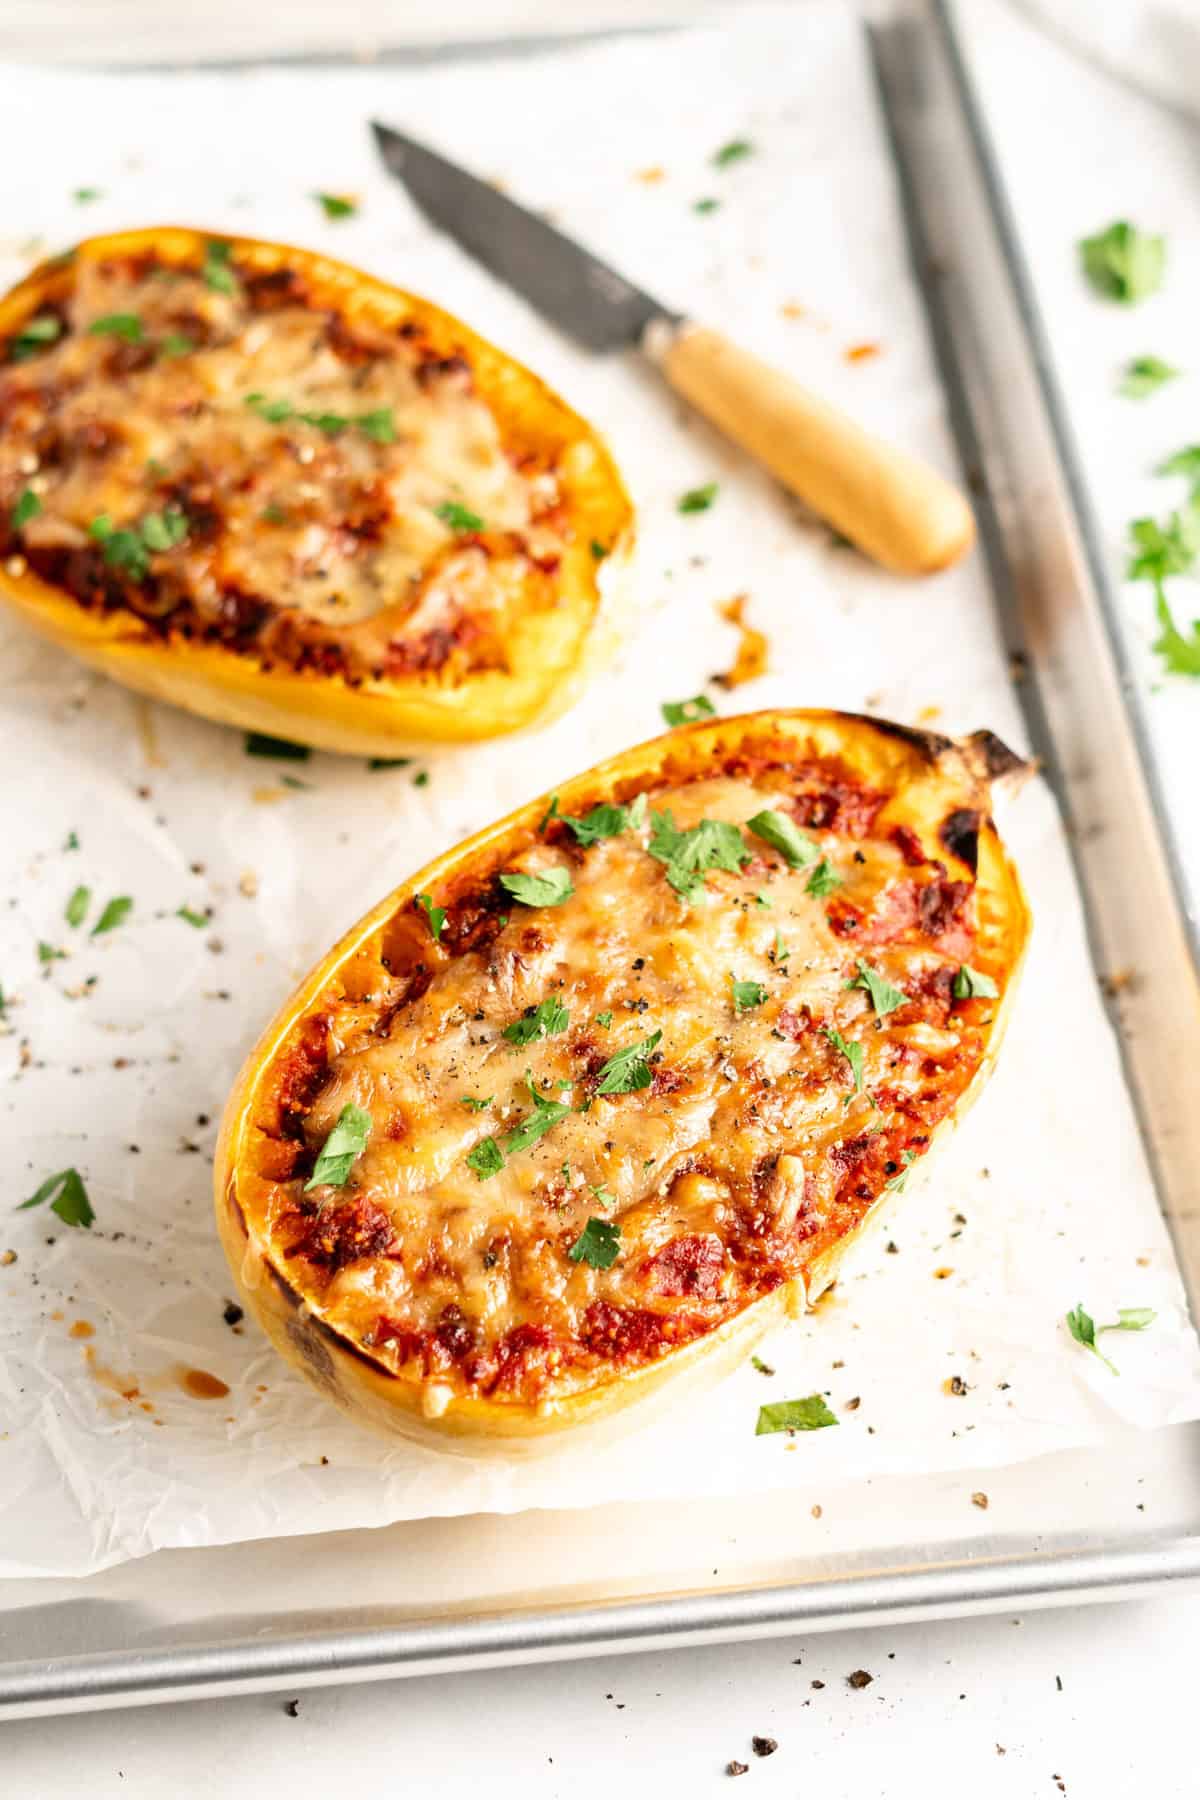 Two lasagna-stuffed spaghetti squash halves on parchment-lined baking sheet